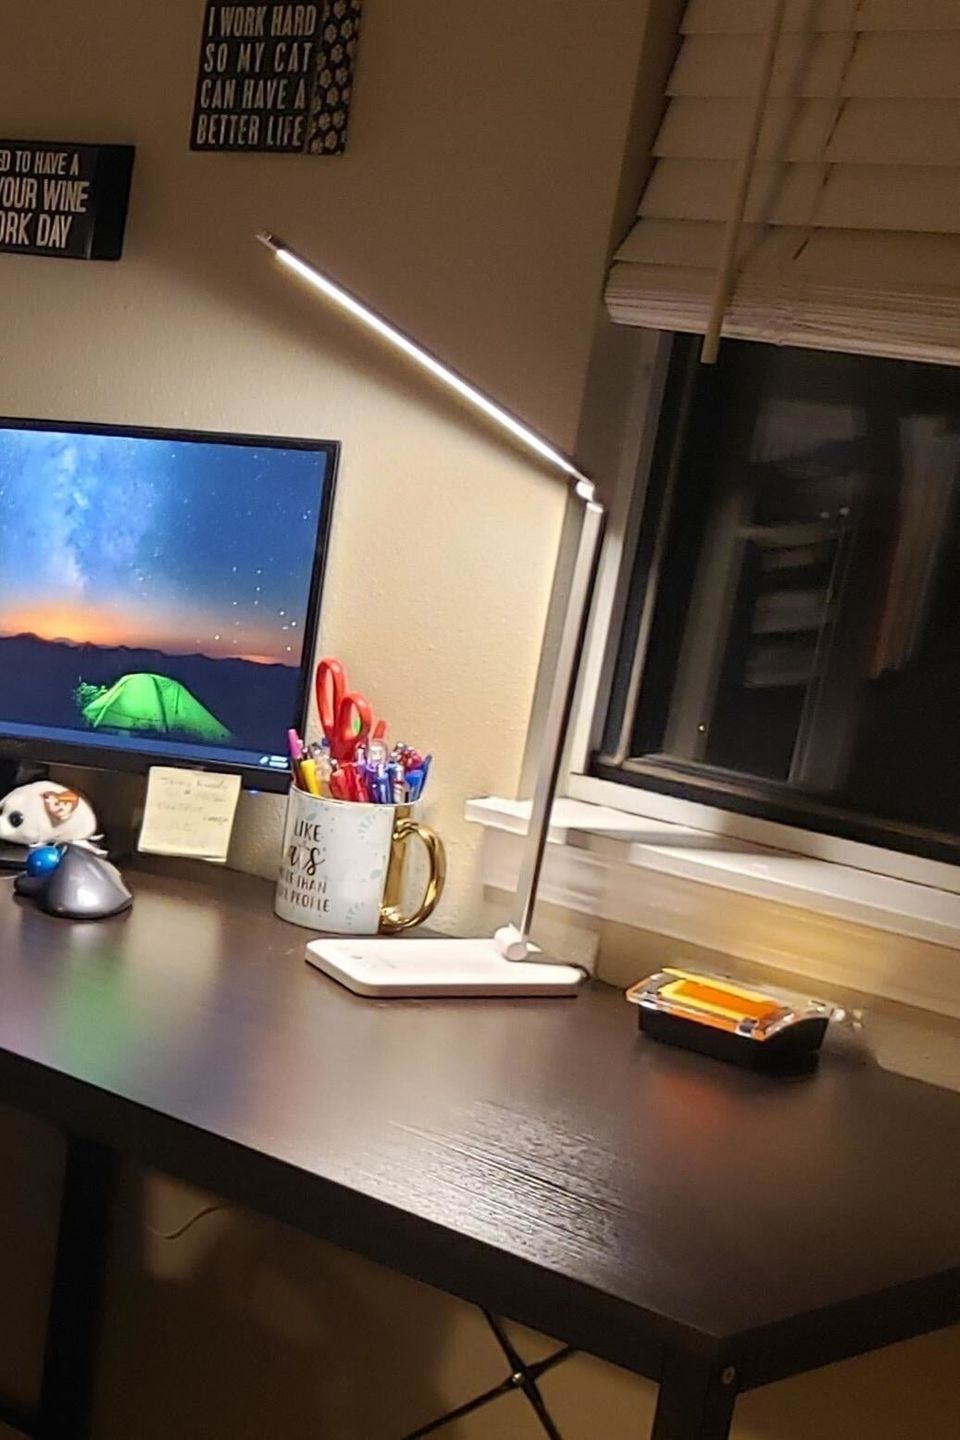 12 Things Everyone Should Have if They're Working From Home